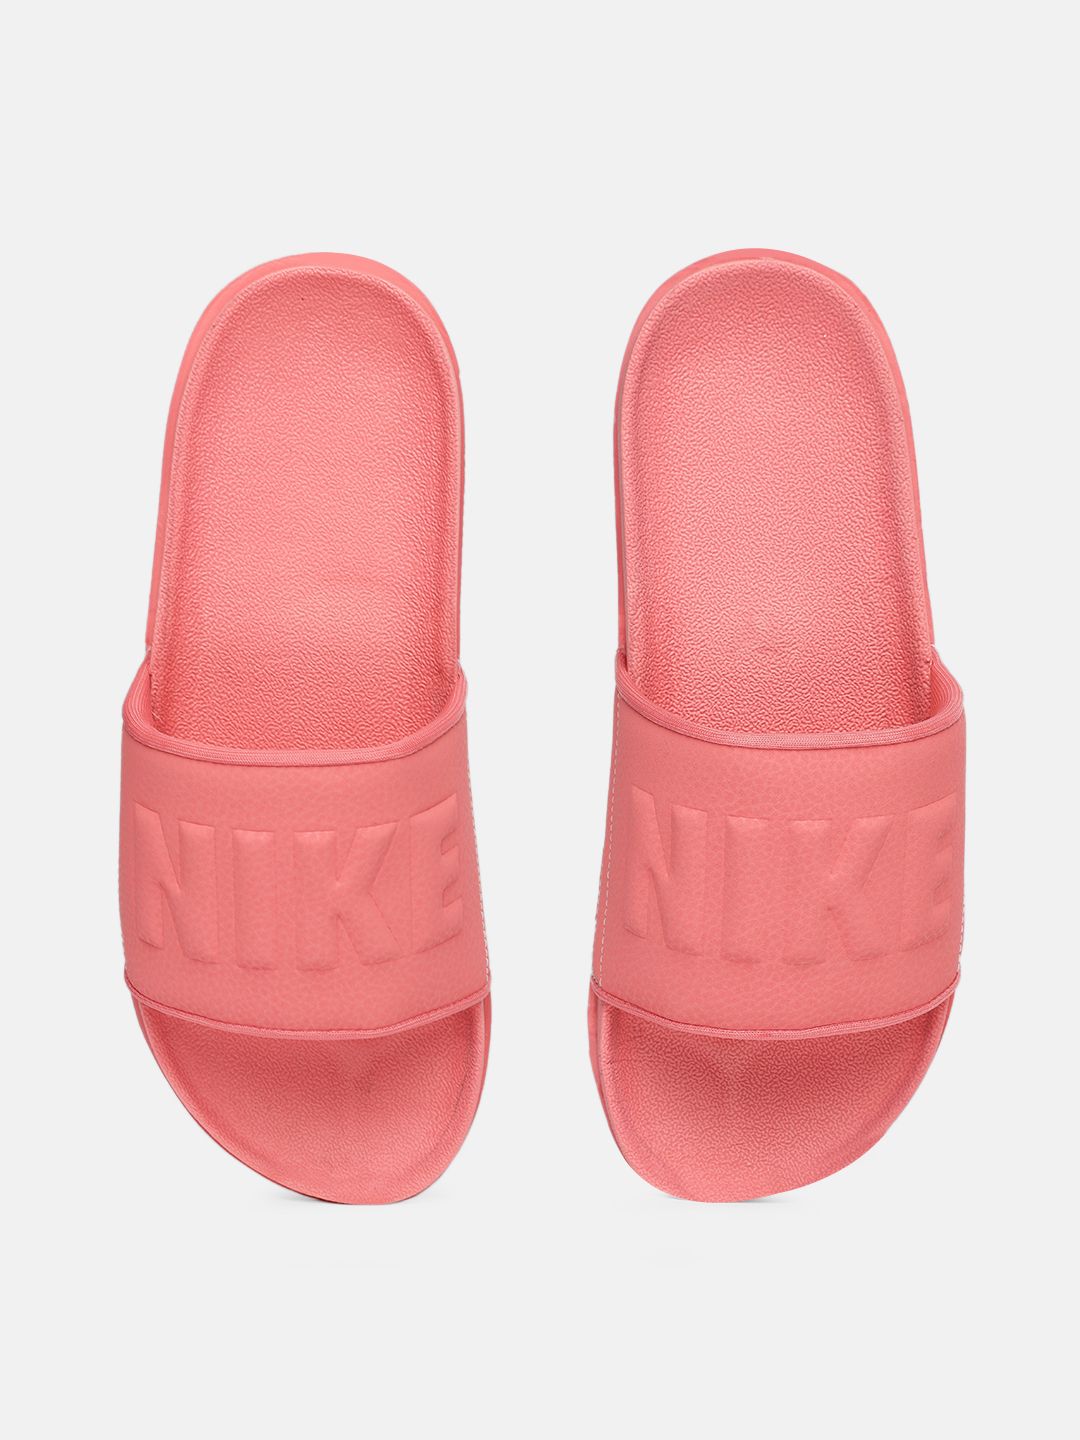 Nike Women Coral Red Solid Sliders Price in India